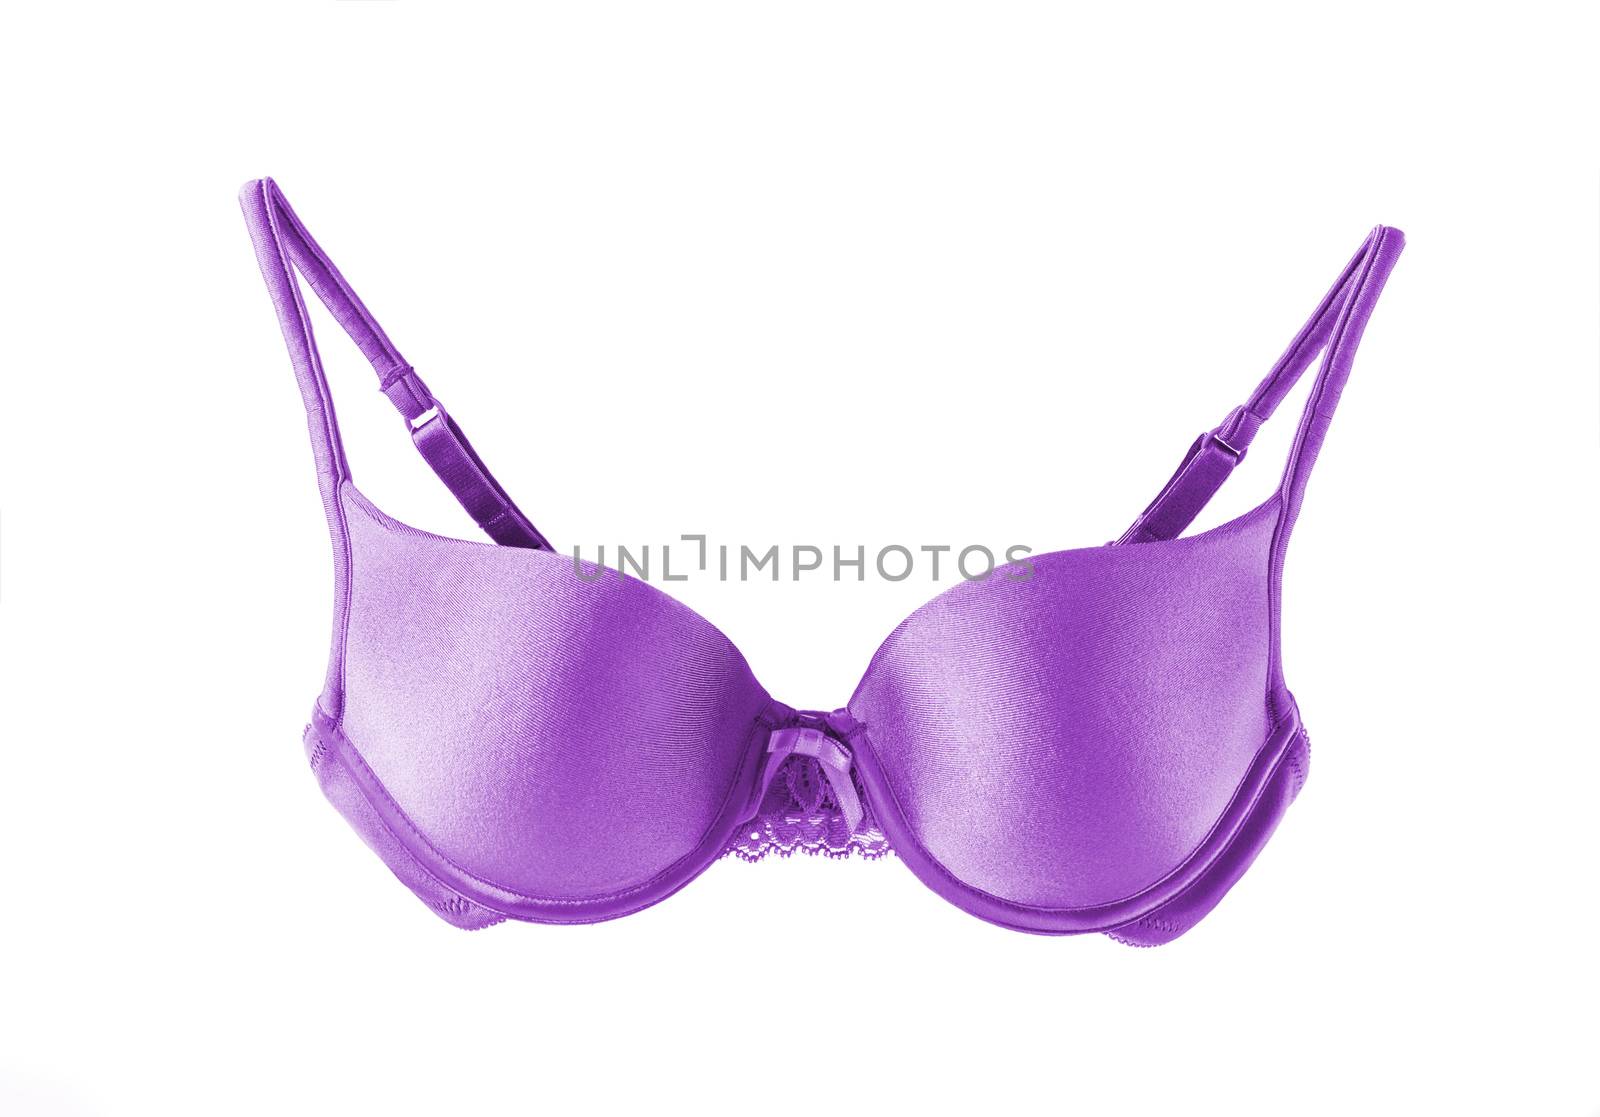 Violet bra isolated on a white background